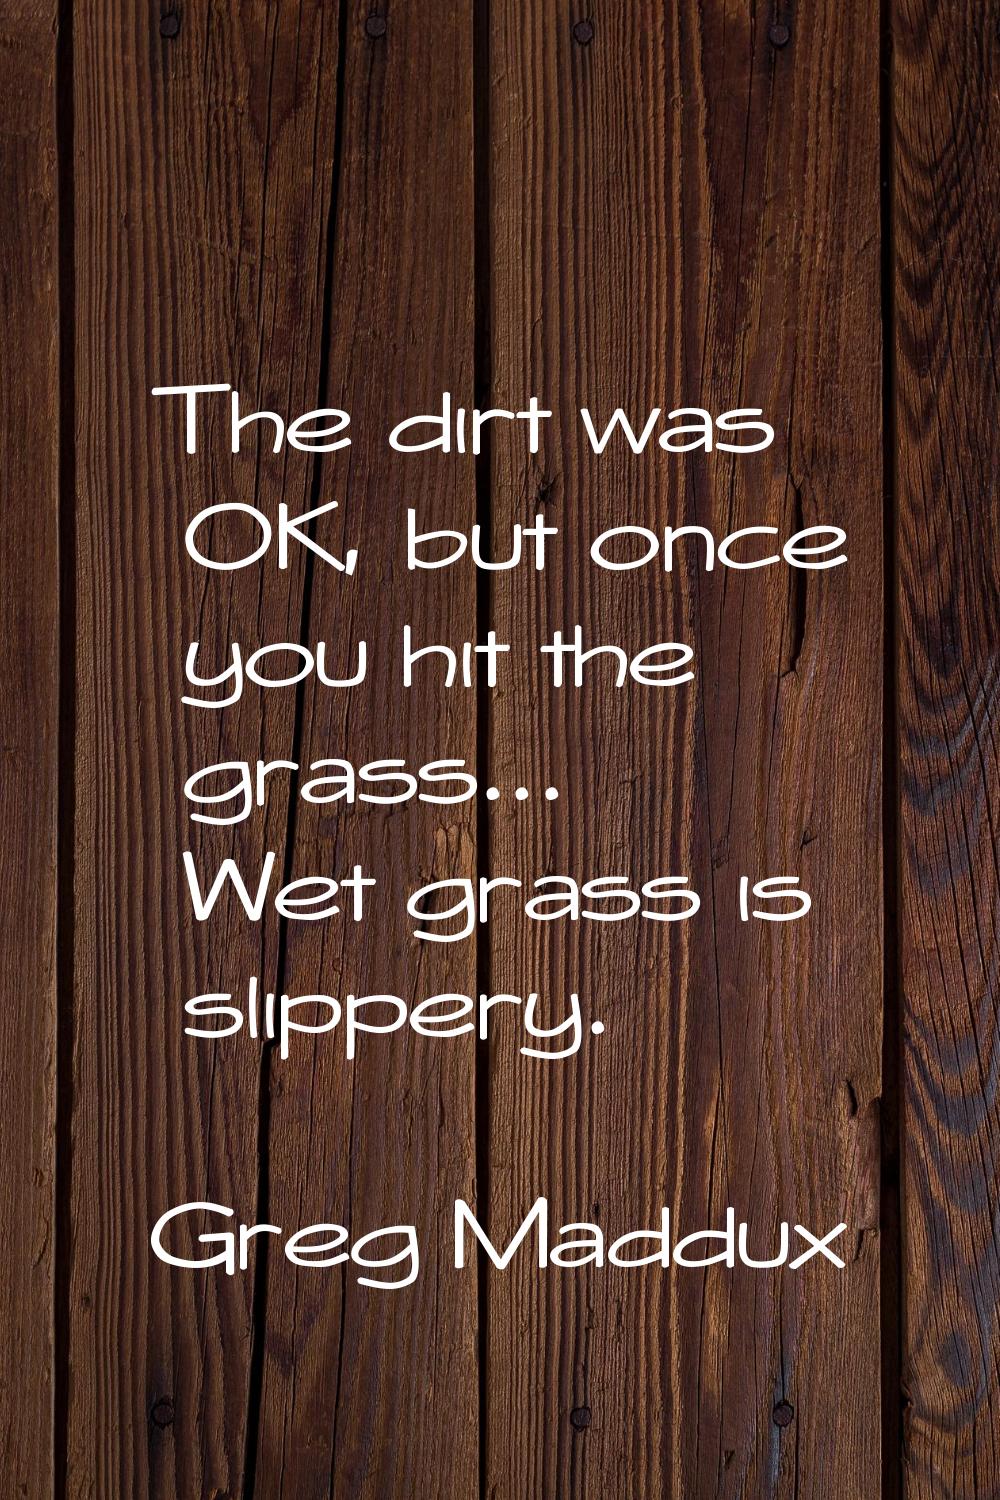 The dirt was OK, but once you hit the grass... Wet grass is slippery.